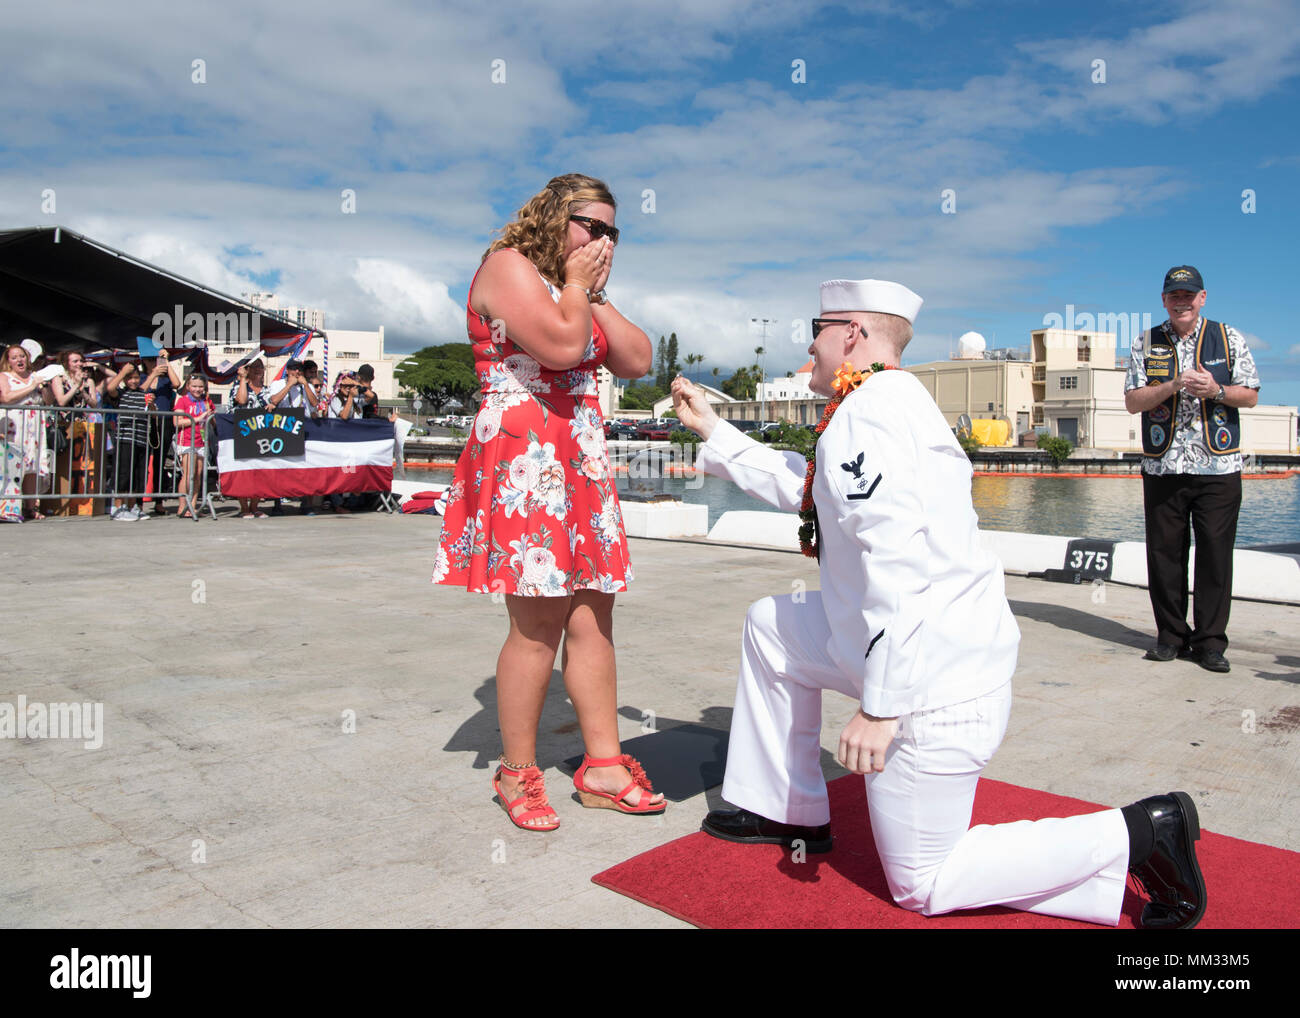 170901-N-KV911-0011 PEARL HARBOR Petty Officer 3rd Class Michael Dodge proposes to his girlfriend Samantha Mills after the Los Angeles-class attack submarine USS Columbus (SSN 762) made its homecoming arrival at Joint Base Pearl Harbor-Hickam, after completing its latest deployment, Sep. 1. Columbus is equipped with vertical launch system for Tomahawk cruise missiles and an improved hull design for under-ice operations.(U.S. Navy Photo by Mass Communication Specialist 2nd Class Shaun Griffin/Released) Stock Photo